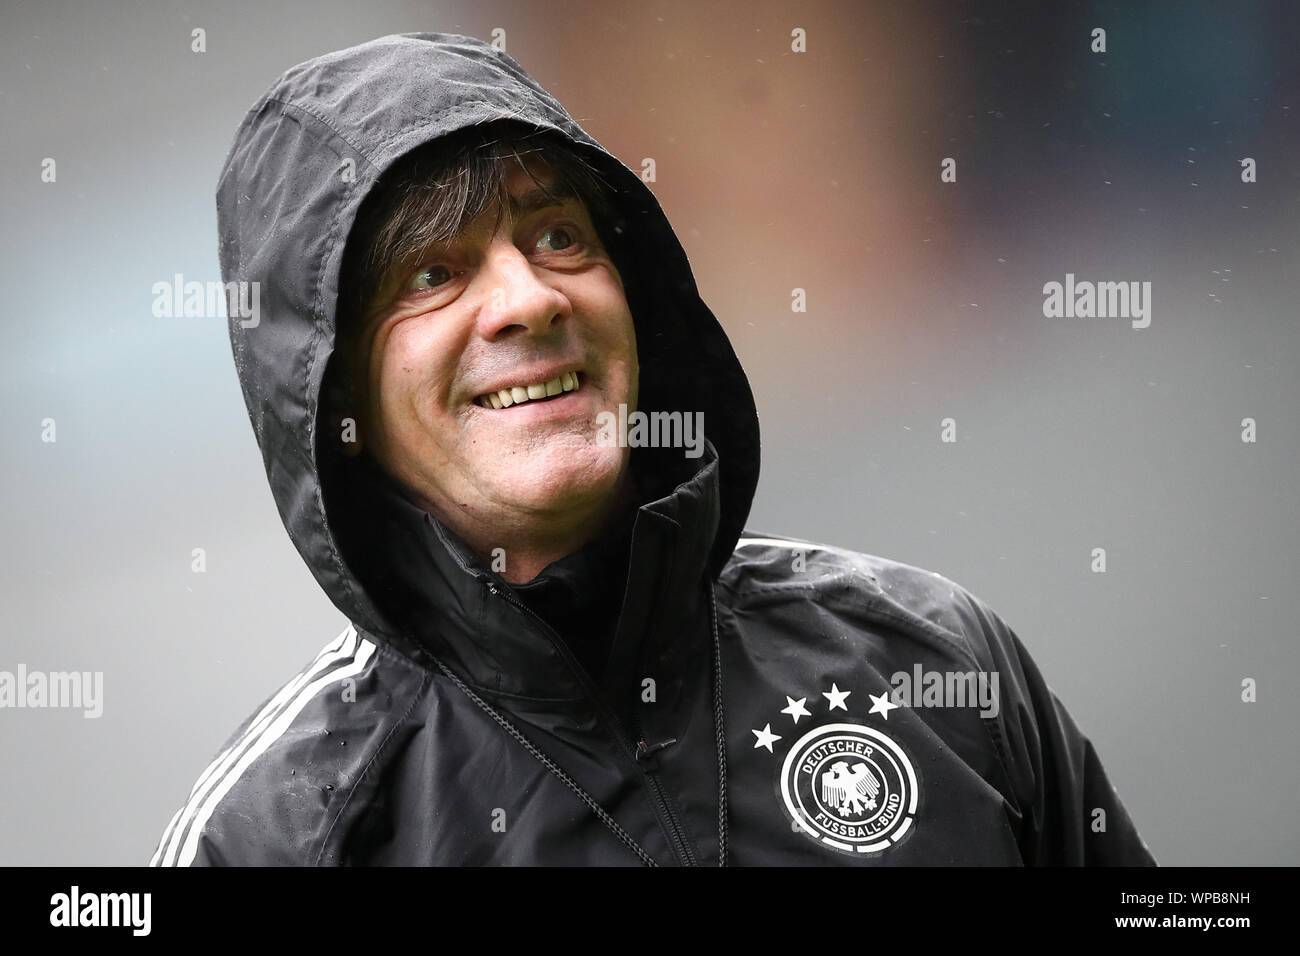 Belfast, UK. 08th Sep, 2019. Soccer: National team, final training Germany before the European Championship qualifier Northern Ireland - Germany in Windsor Park Stadium. National coach Joachim Löw laughs during the training. Credit: Christian Charisius/dpa/Alamy Live News Stock Photo